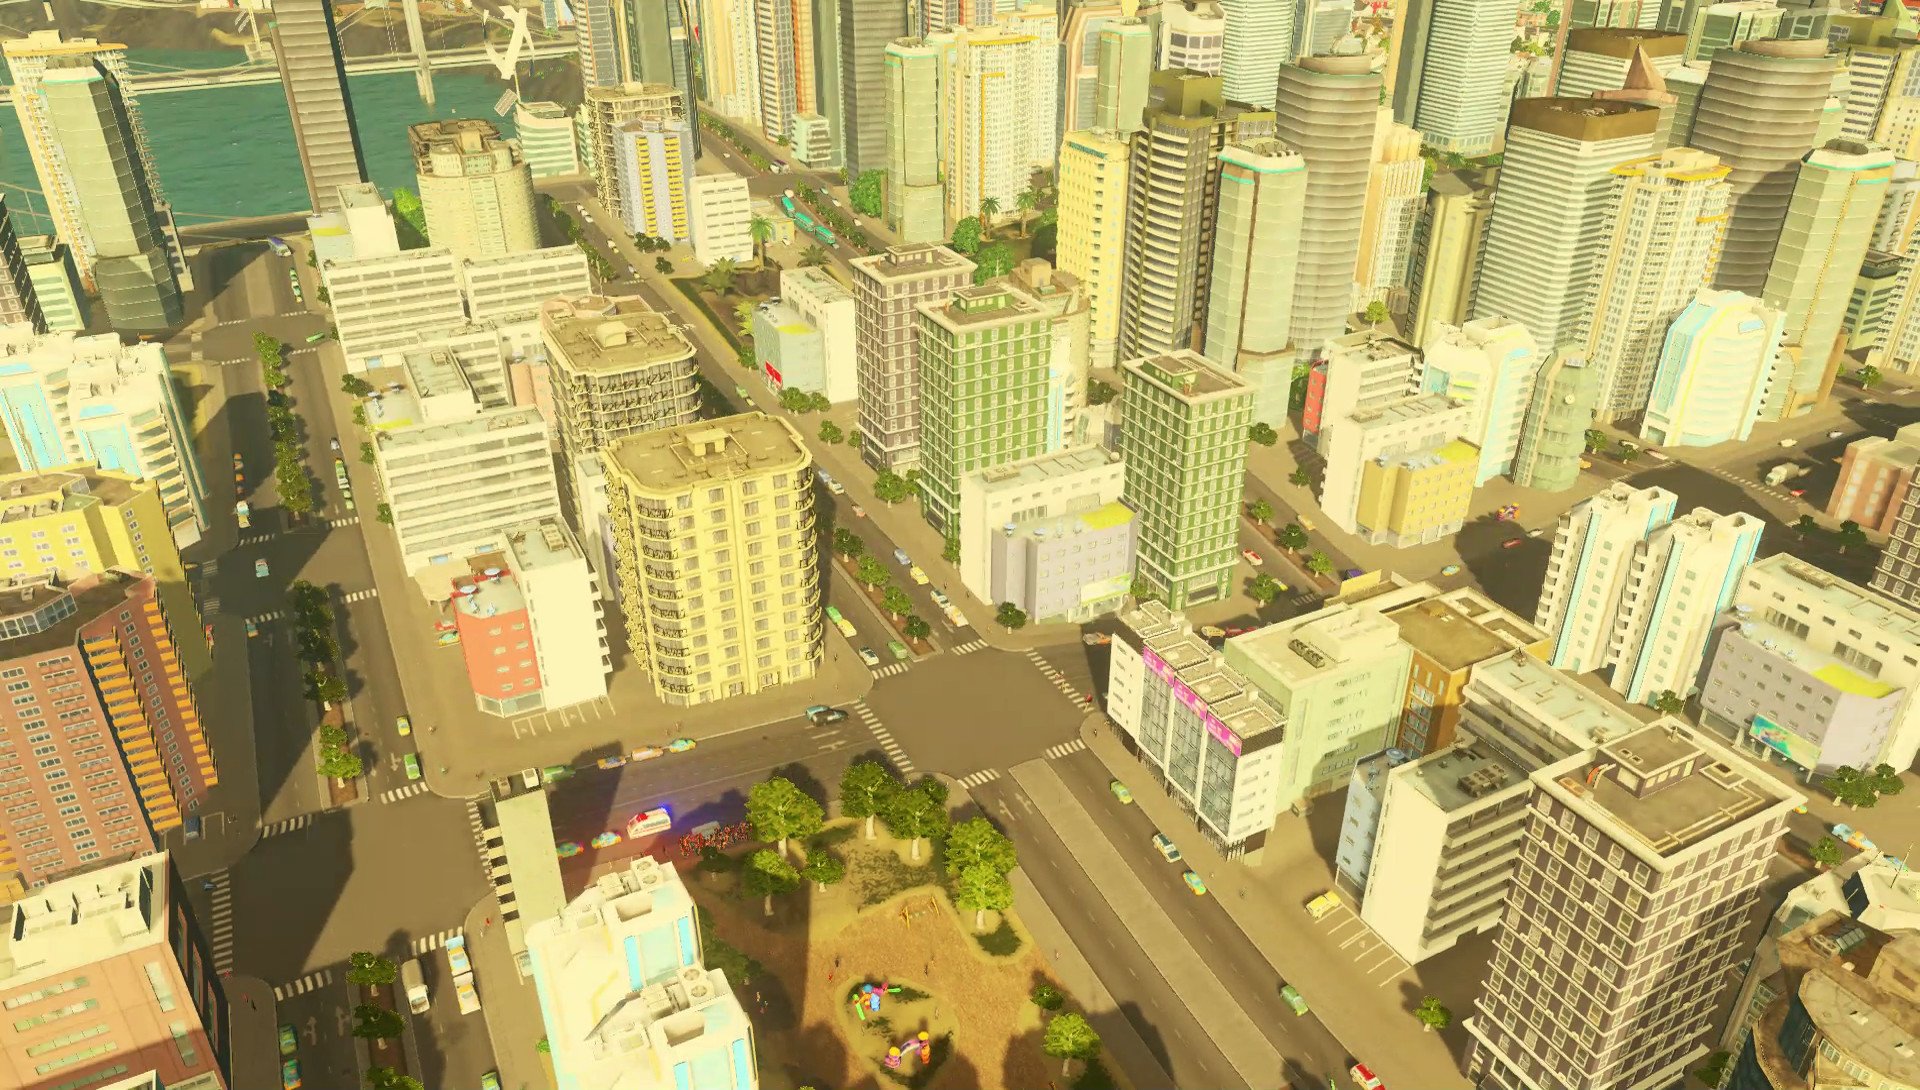 cities-skylines-preview%20%286%29.jpg